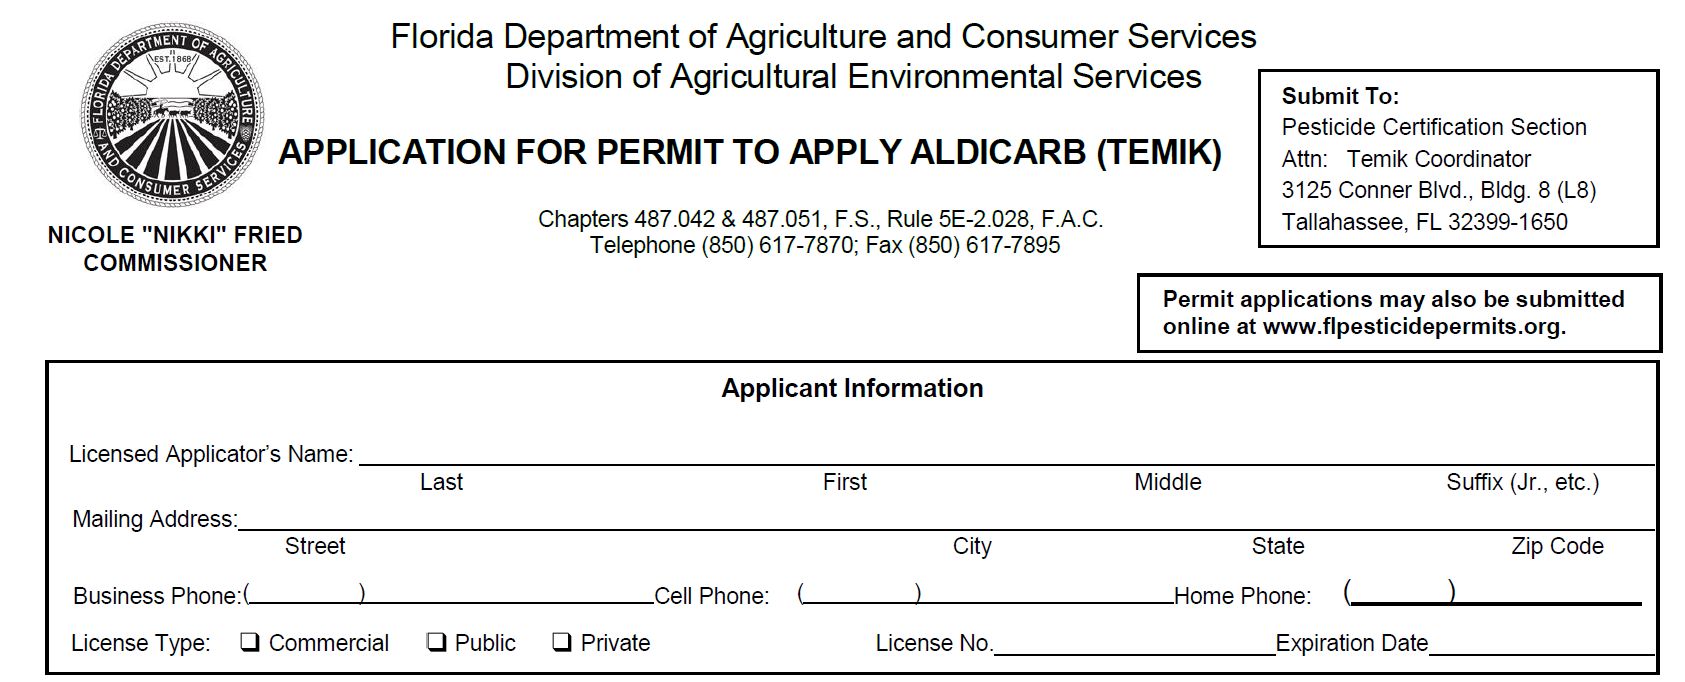 The aldicarb application permit, including the “Applicant Information” section. Note that the website provided to submit application permits is NOT working, but a new website is in progress. As we mentioned above, the application for permit references Temik, but it applies to AgLogic 15GG, the currently registered aldicarb product. For questions about completing the aldicarb permit application, contact the FDACS Pesticide Certification Office at 850-617-7876 or tamara.james@fdacs.gov.